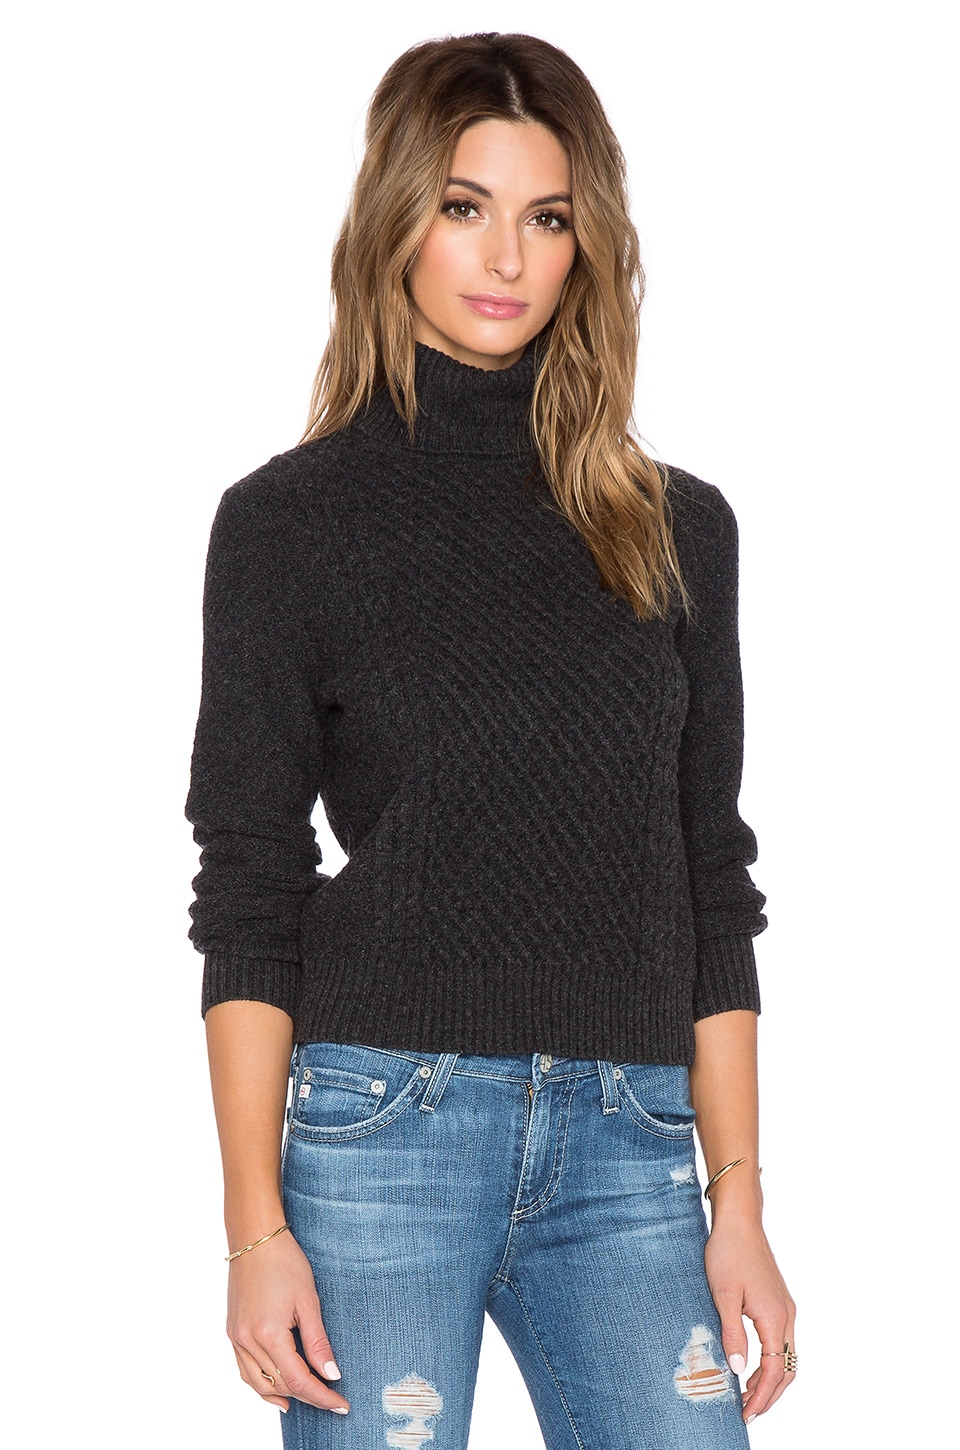 Equipment Atticus Turtleneck Cashmere Sweater in Charcoal Heather Grey ...